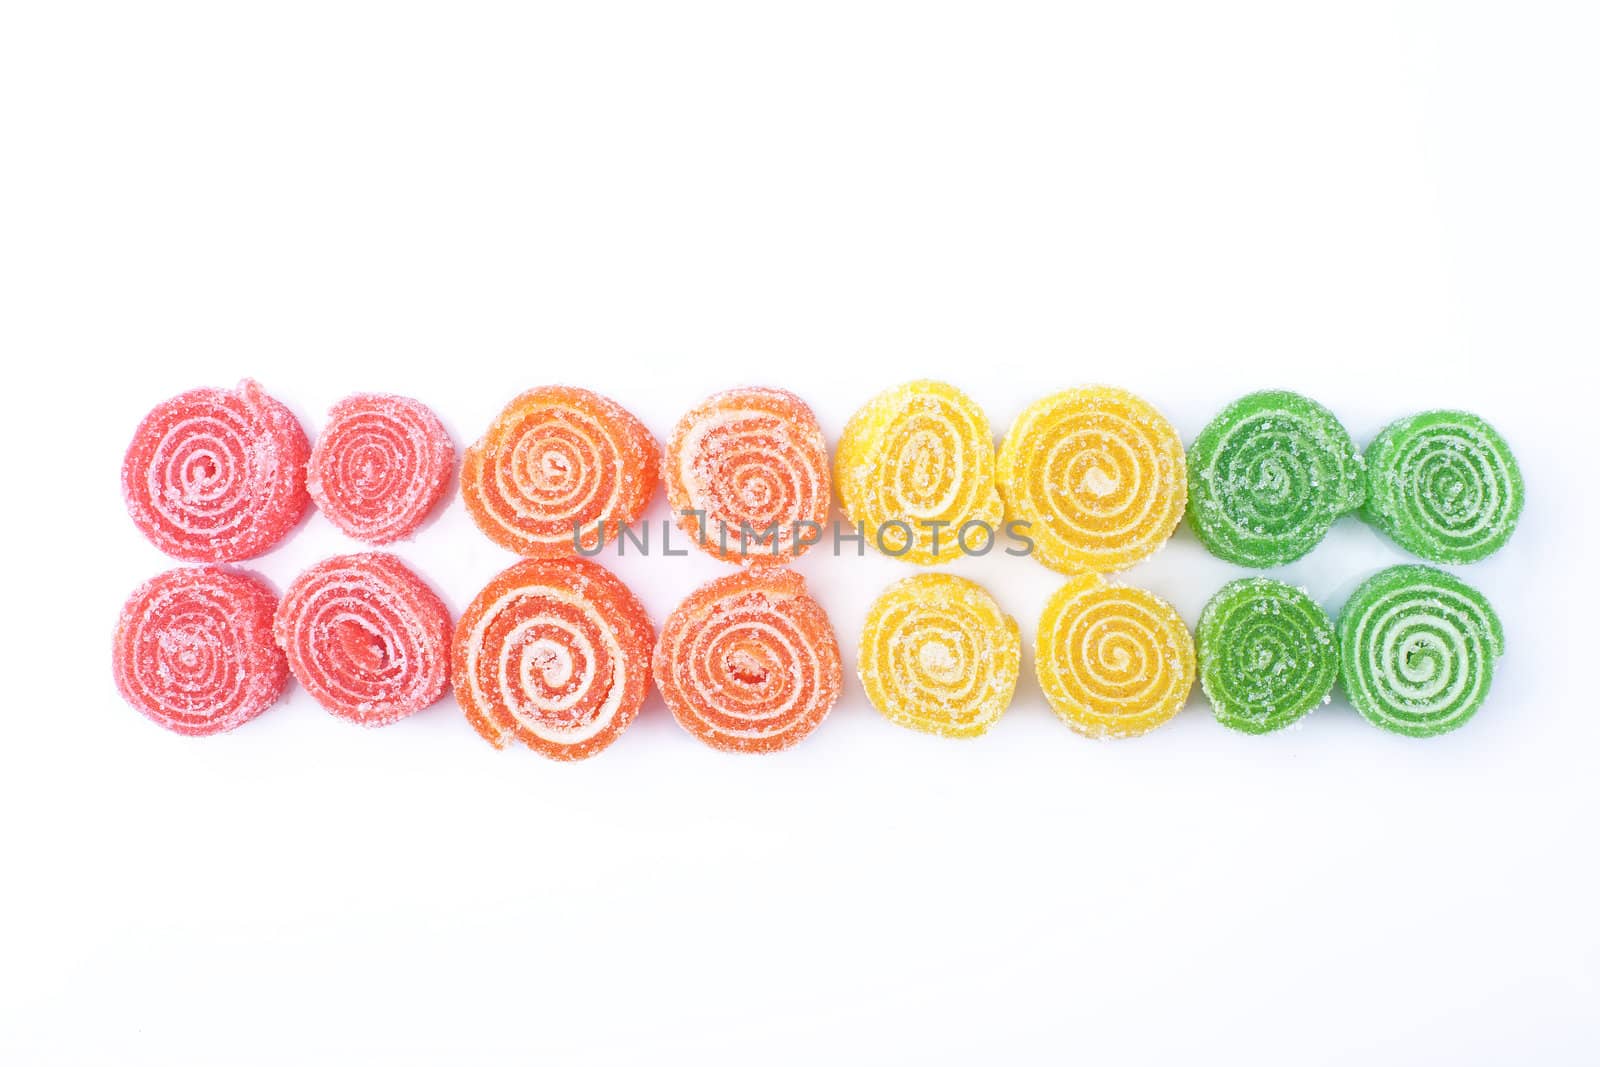 Candied fruit jelly on isolated white background